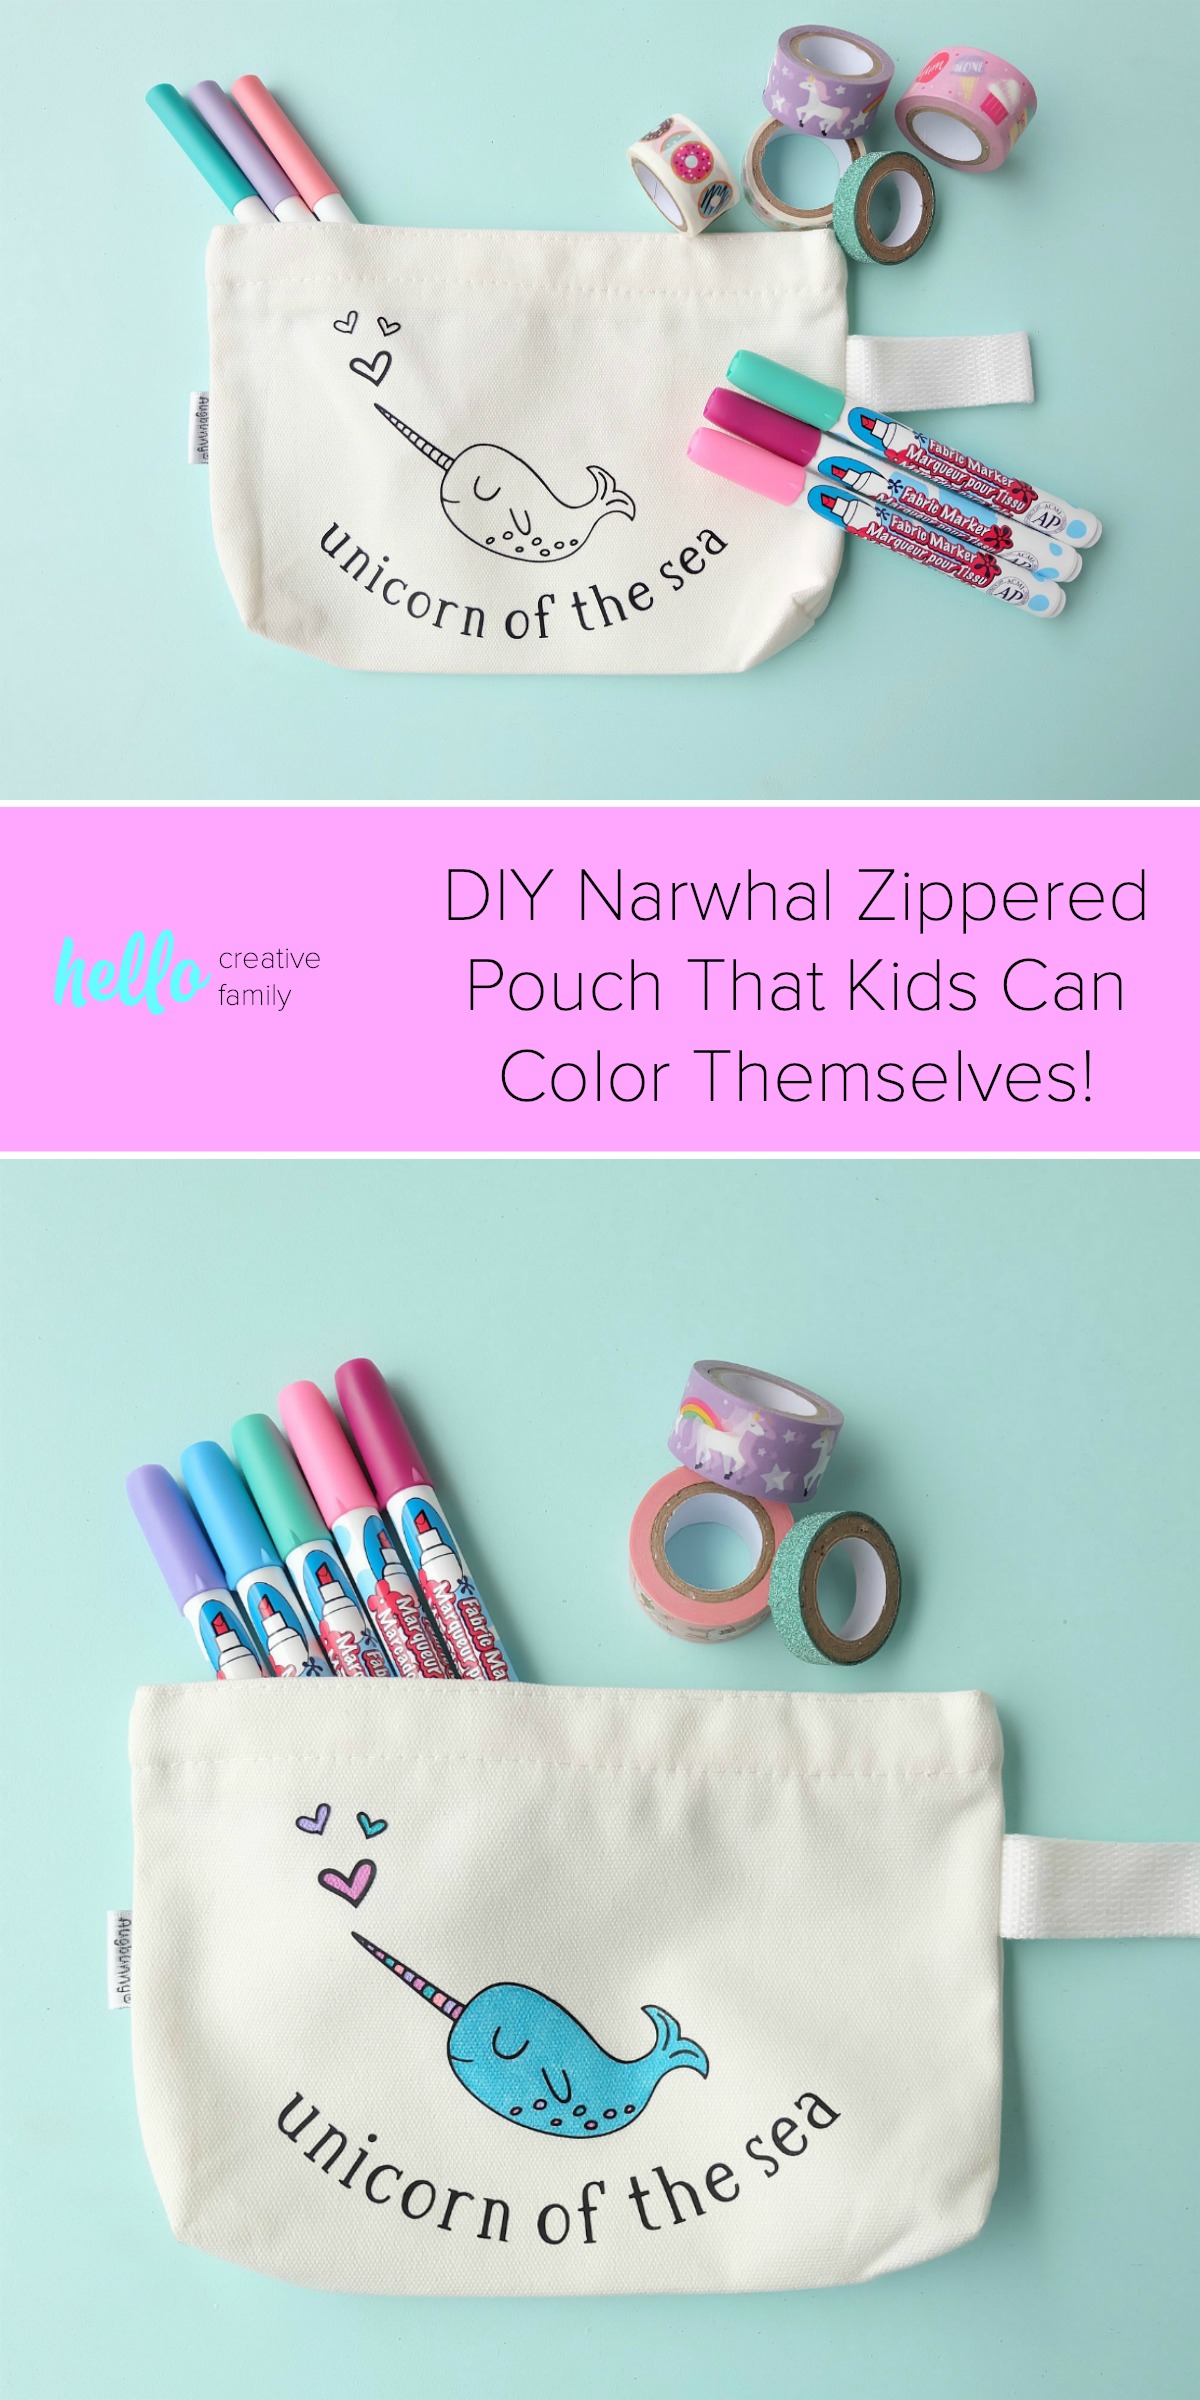 Create a sweet little DIY Narwhal Zippered Pouch that the recipient can color in! This thoughtful handmade gift idea takes only minutes to make and is a great present for kids (or adults!) It's a coloring sheet and a pencil pouch in one! #Cricut #Narwhal #DIY #Coloring